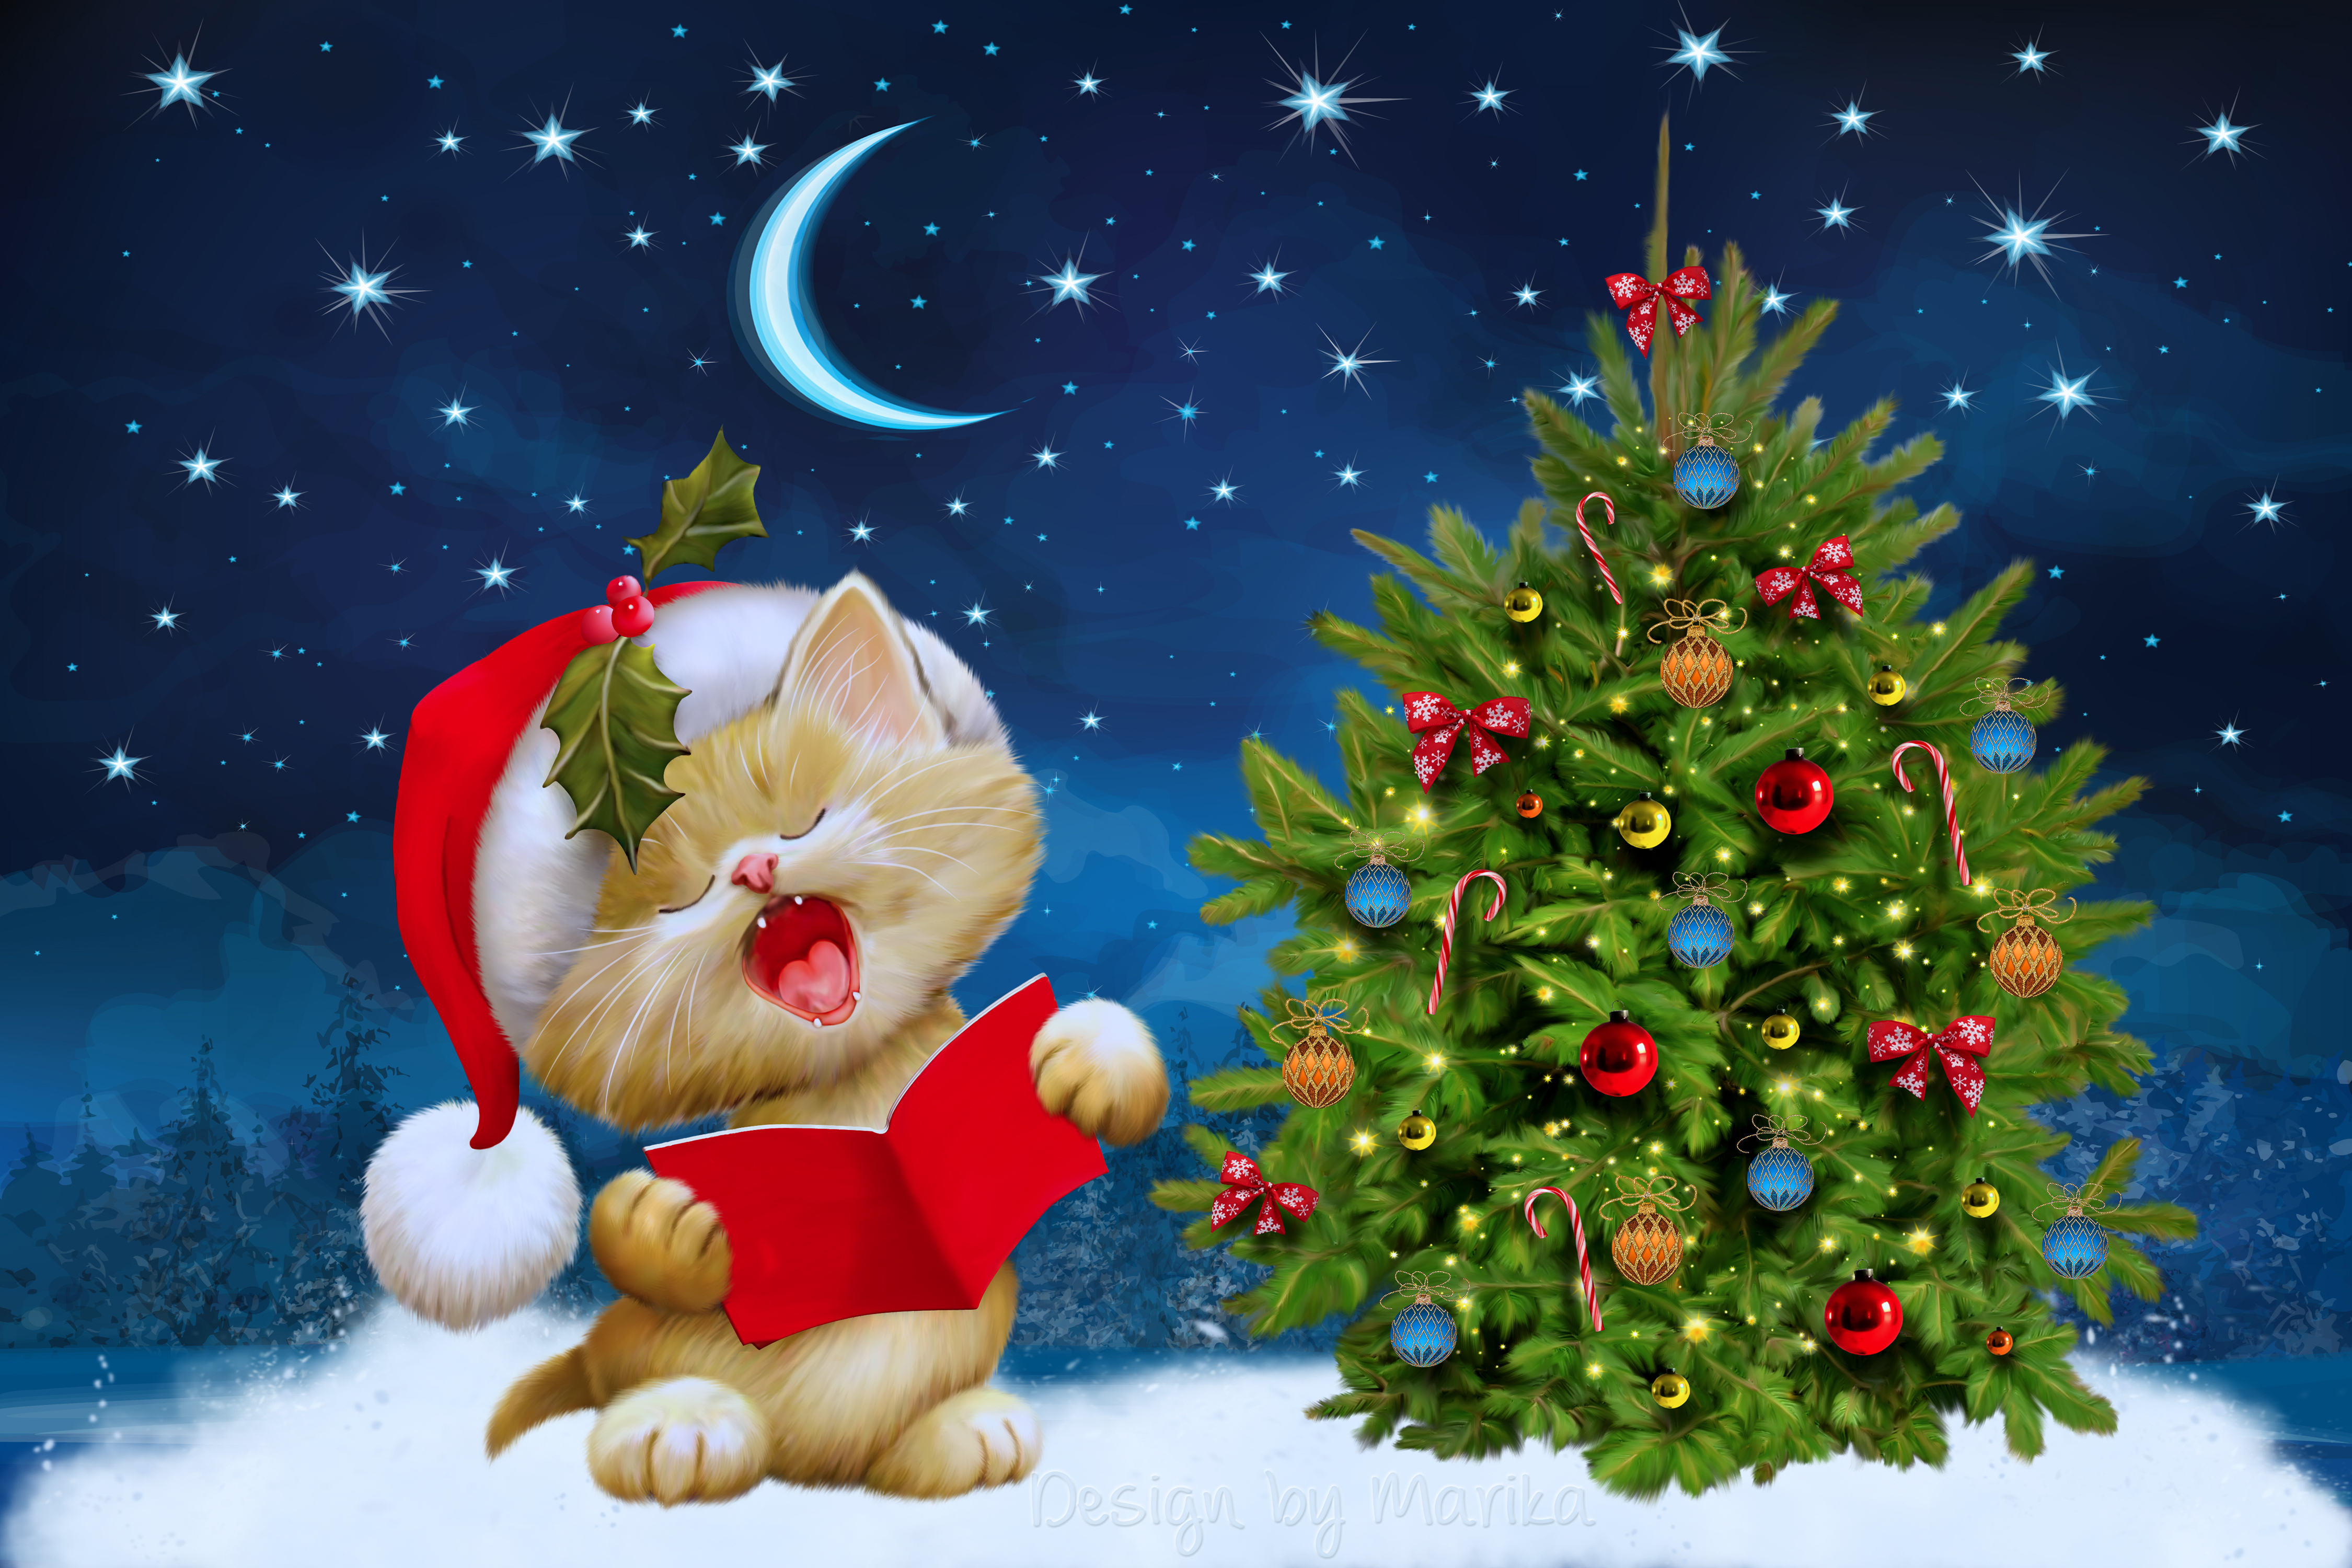 Download wallpaper 4500x3000 new year, christmas, cat, card HD background